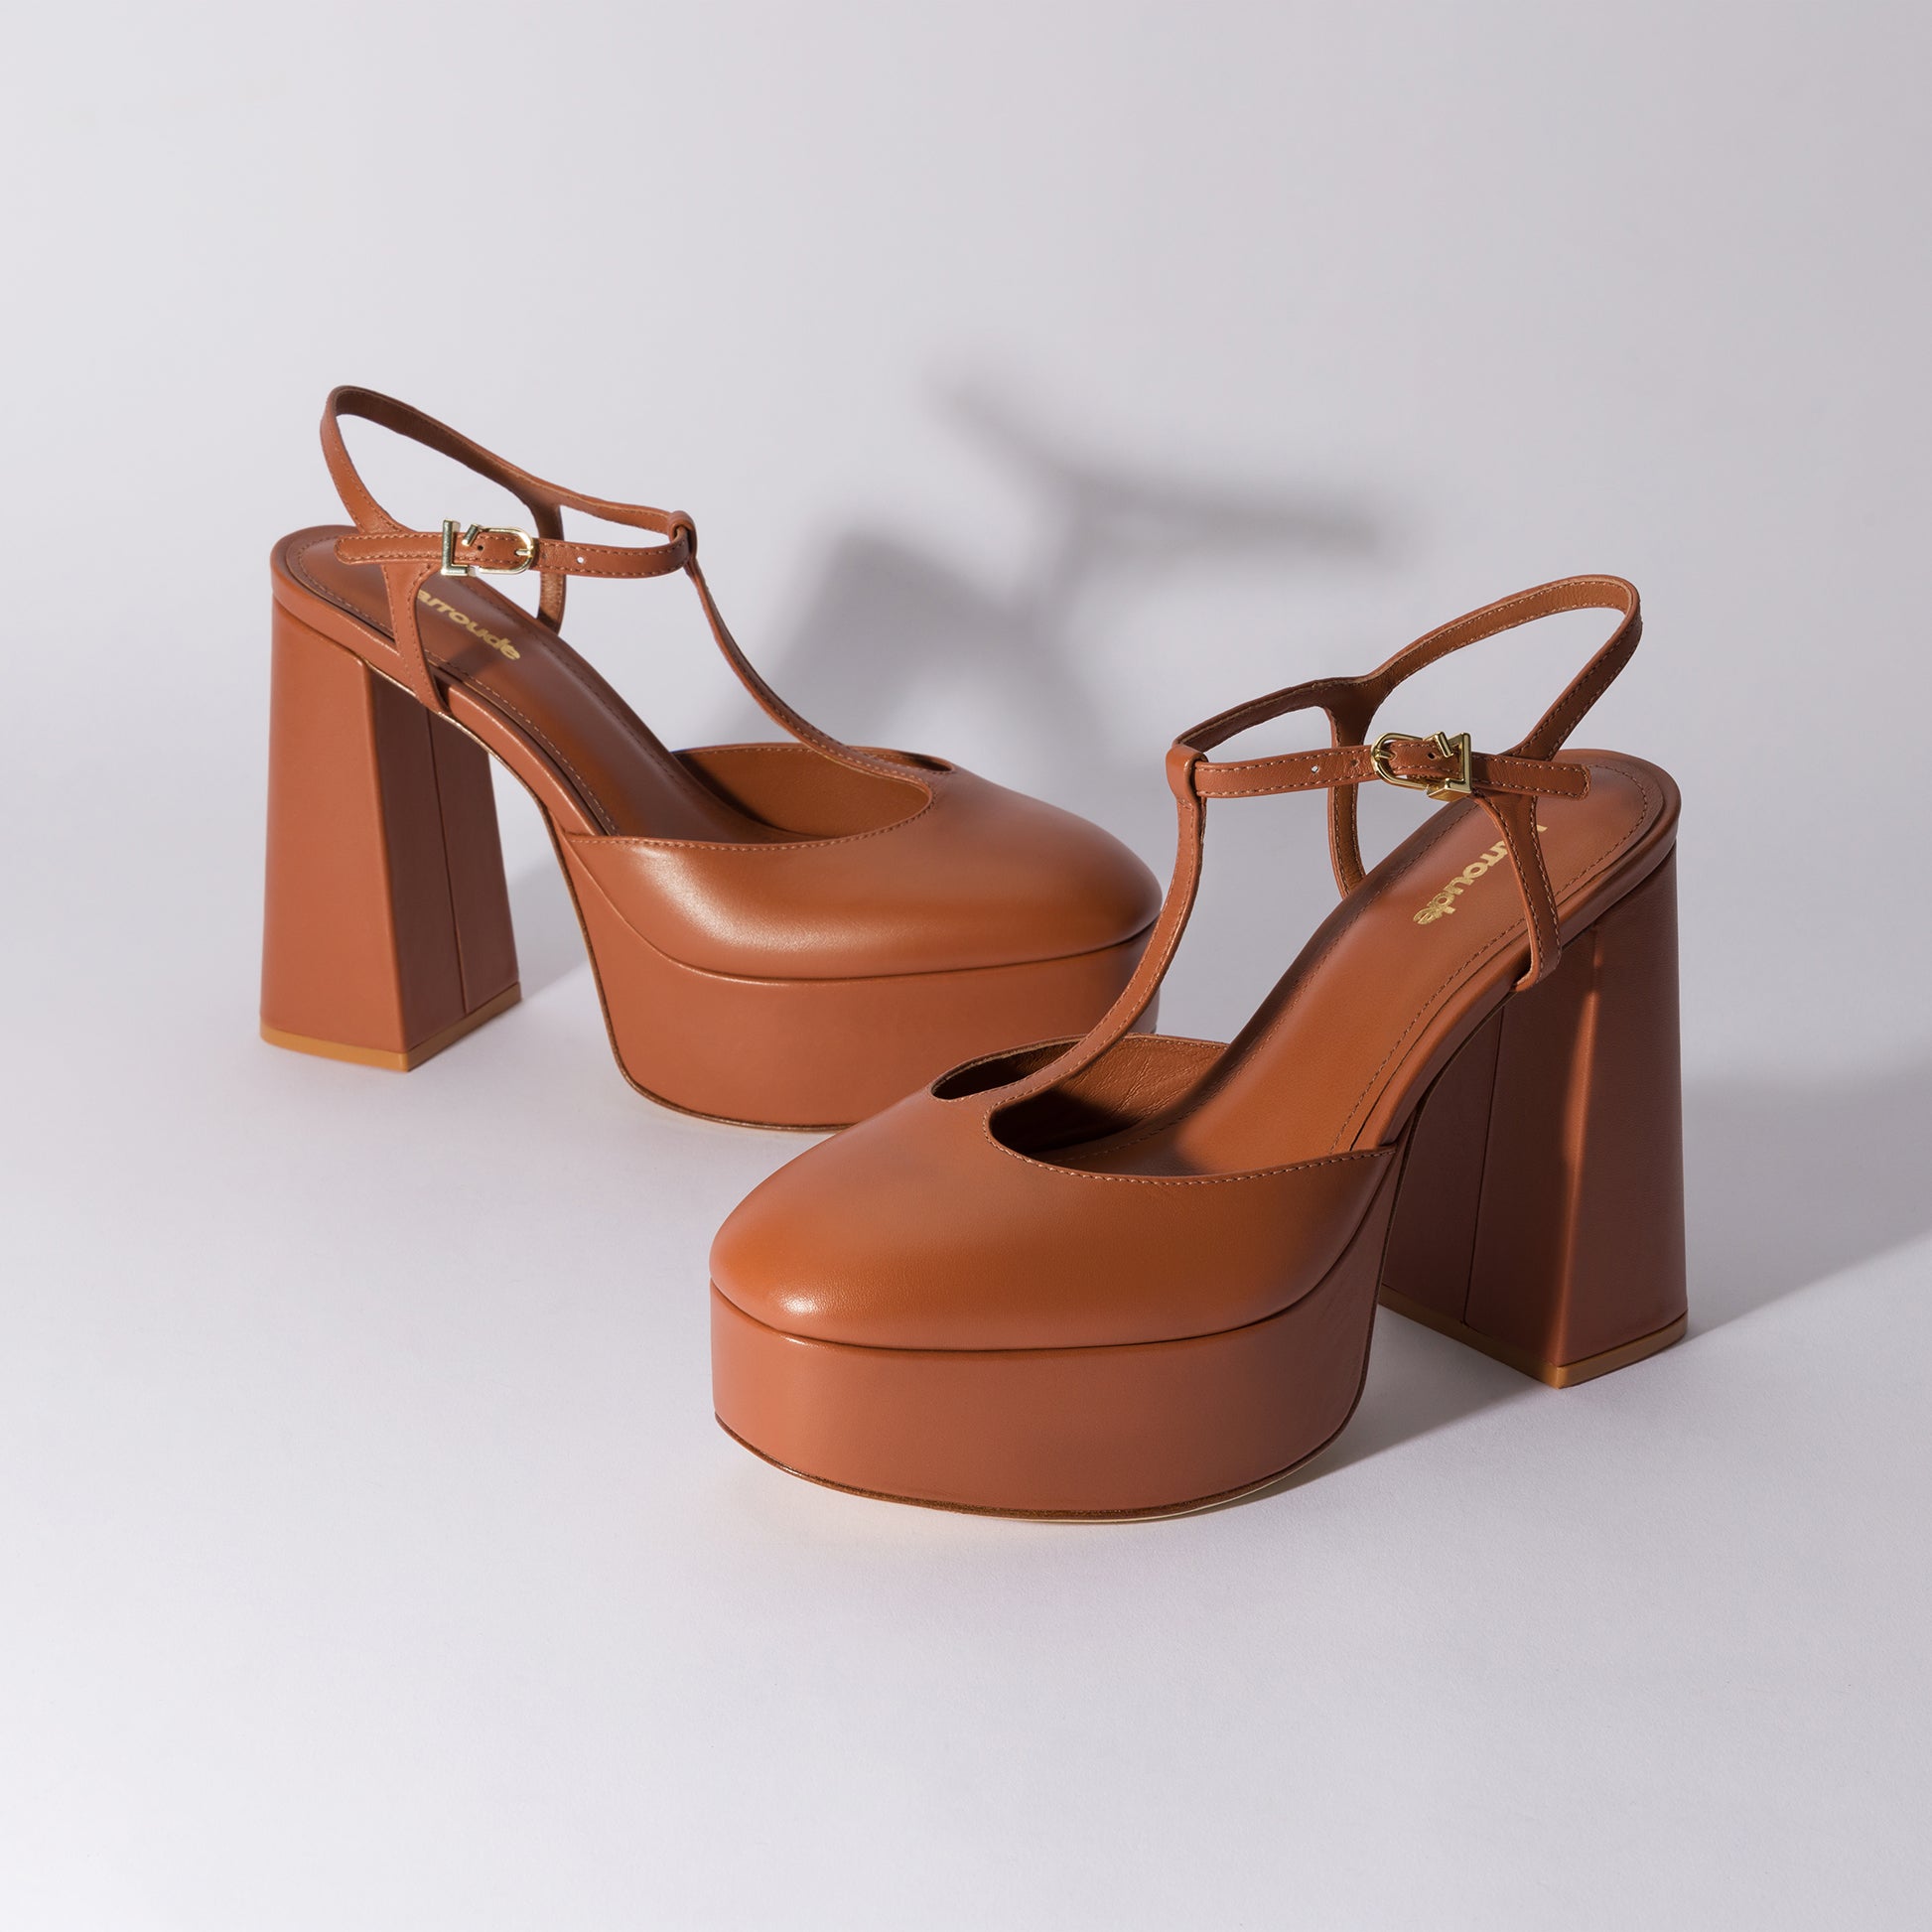 Pixie Pump In Caramel Leather